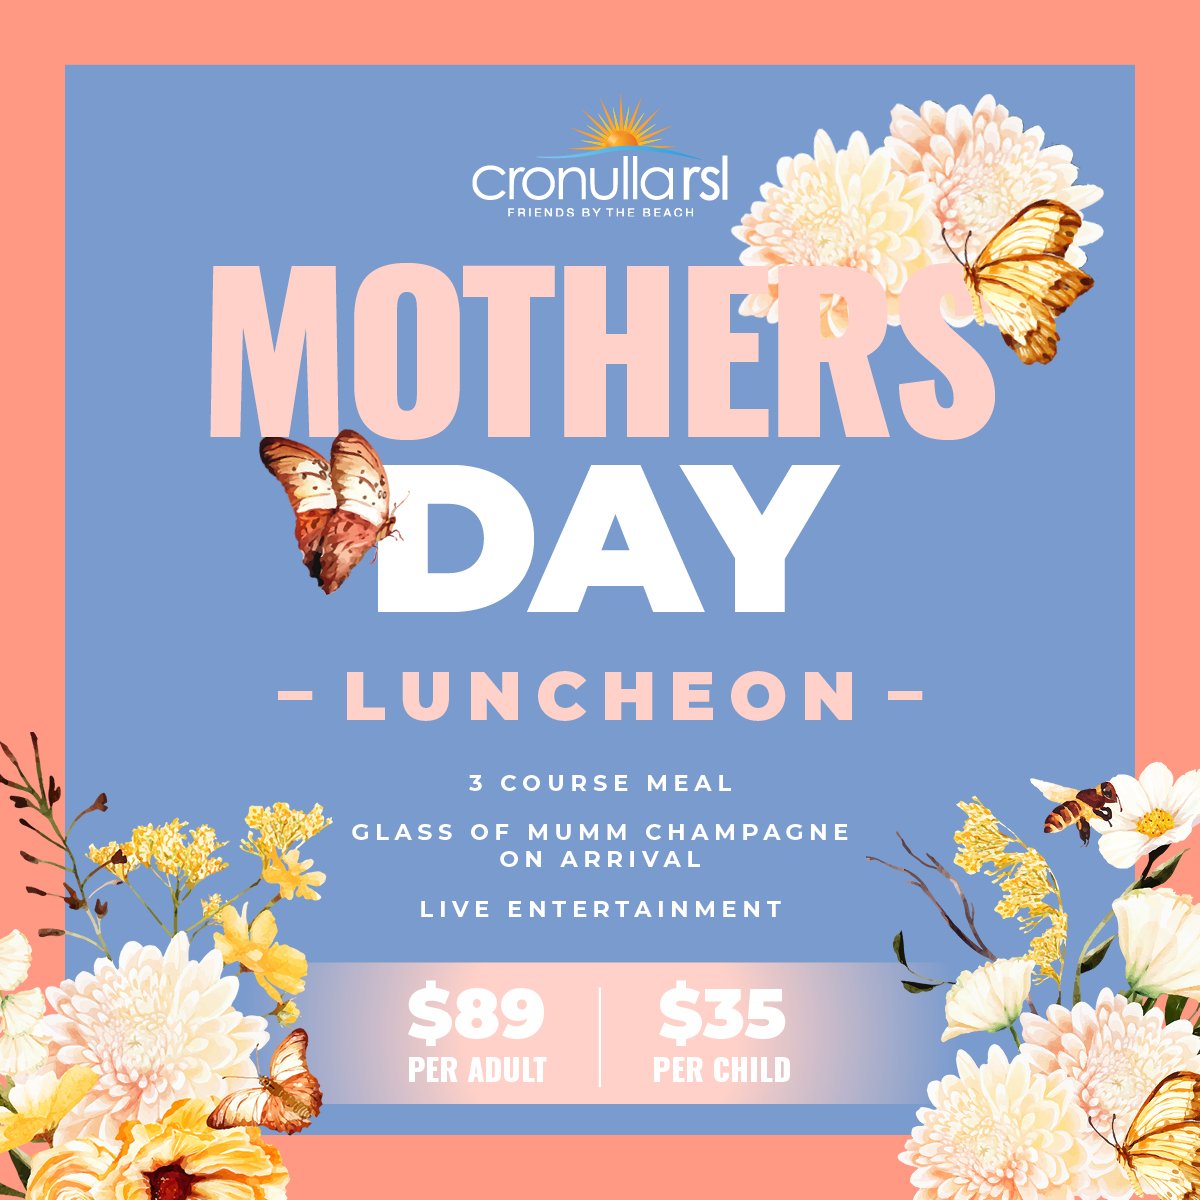 A special day for all the Mums out there! 🌸✨ 

Treat Mum to a delightful Mother's Day luncheon! Indulge in a sumptuous 3-course meal, complete with a glass of Mumm Champagne upon arrival and live entertainment. For just $89 per adult and $35 per chi